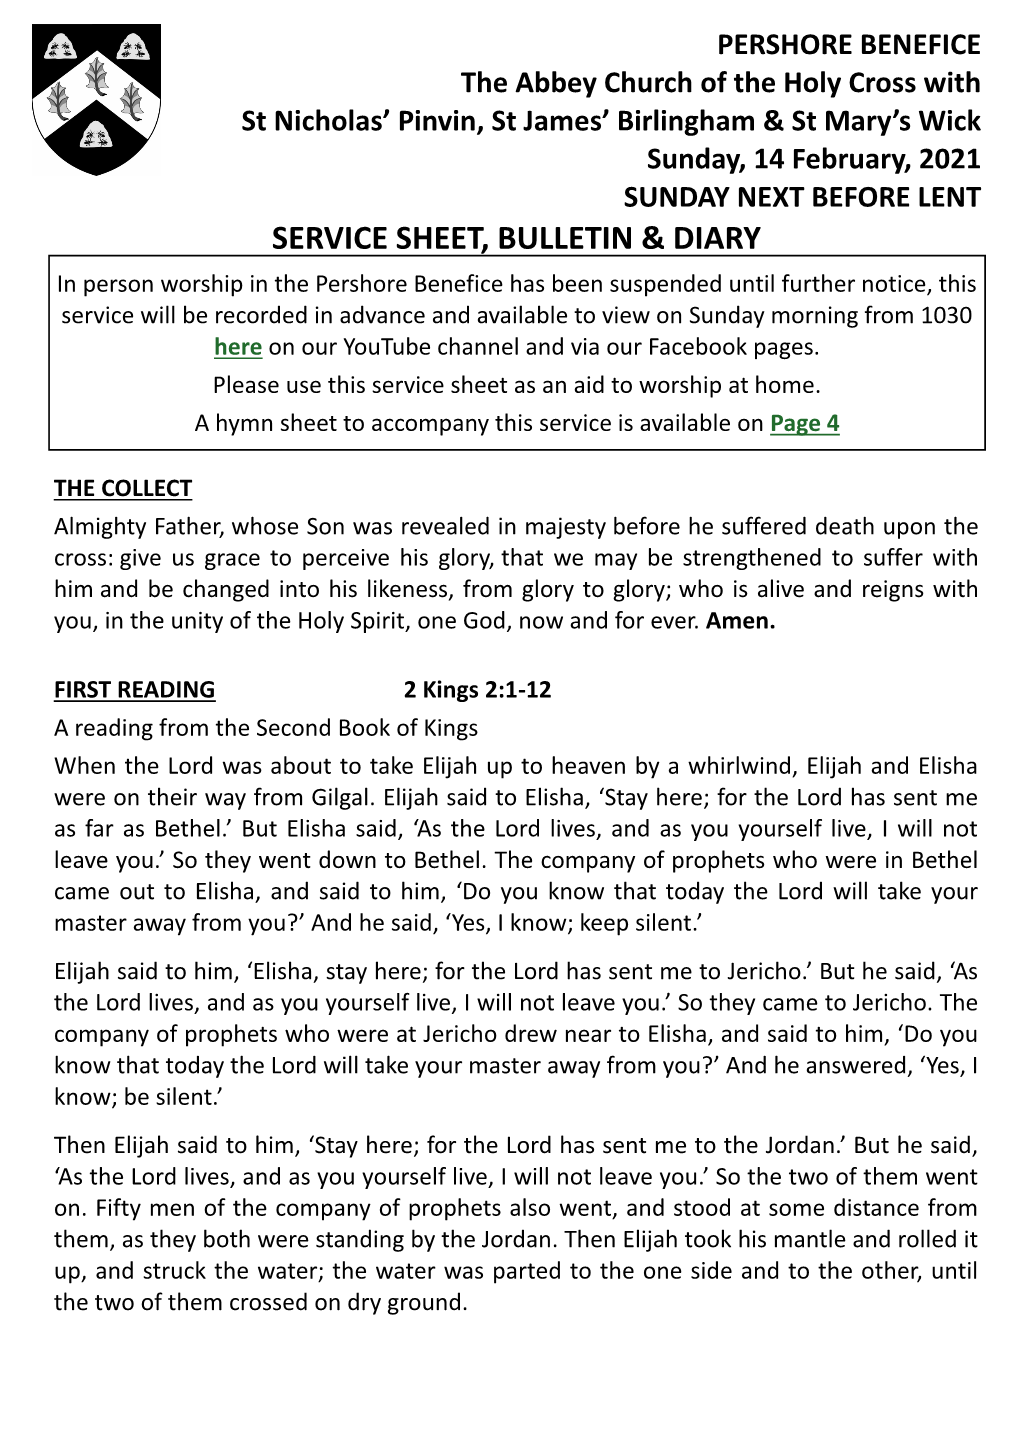 Service Sheet and Bulletin – Sunday Next Before Lent